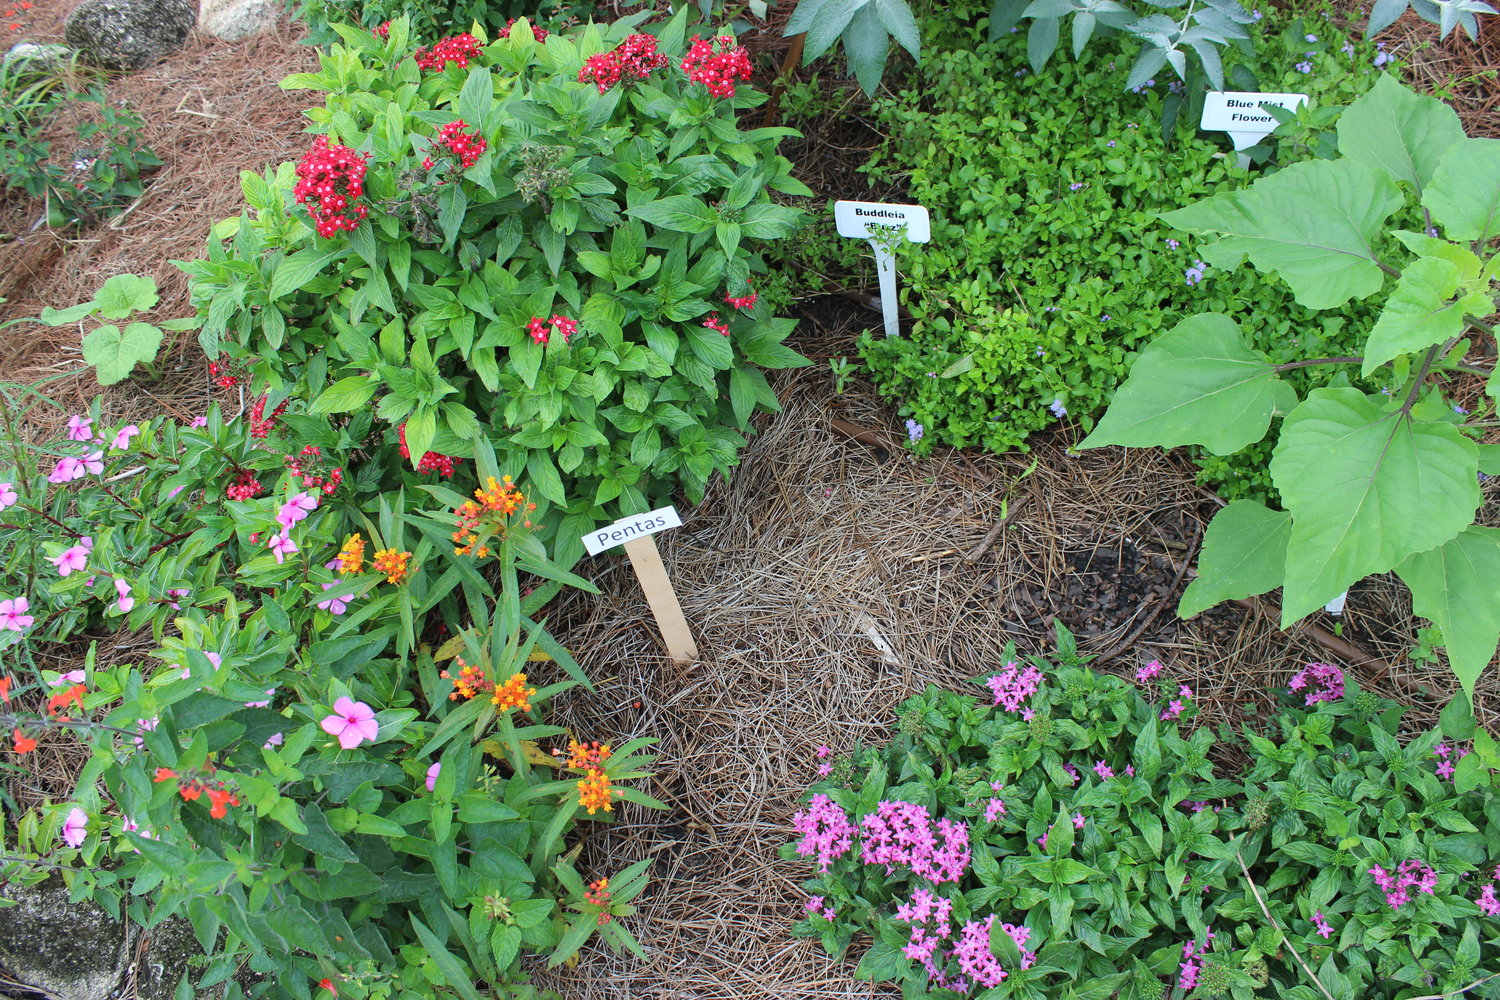 The Beaches Museum’s Heritage garden was bright with flowers during the “Springing the Blooms” event.